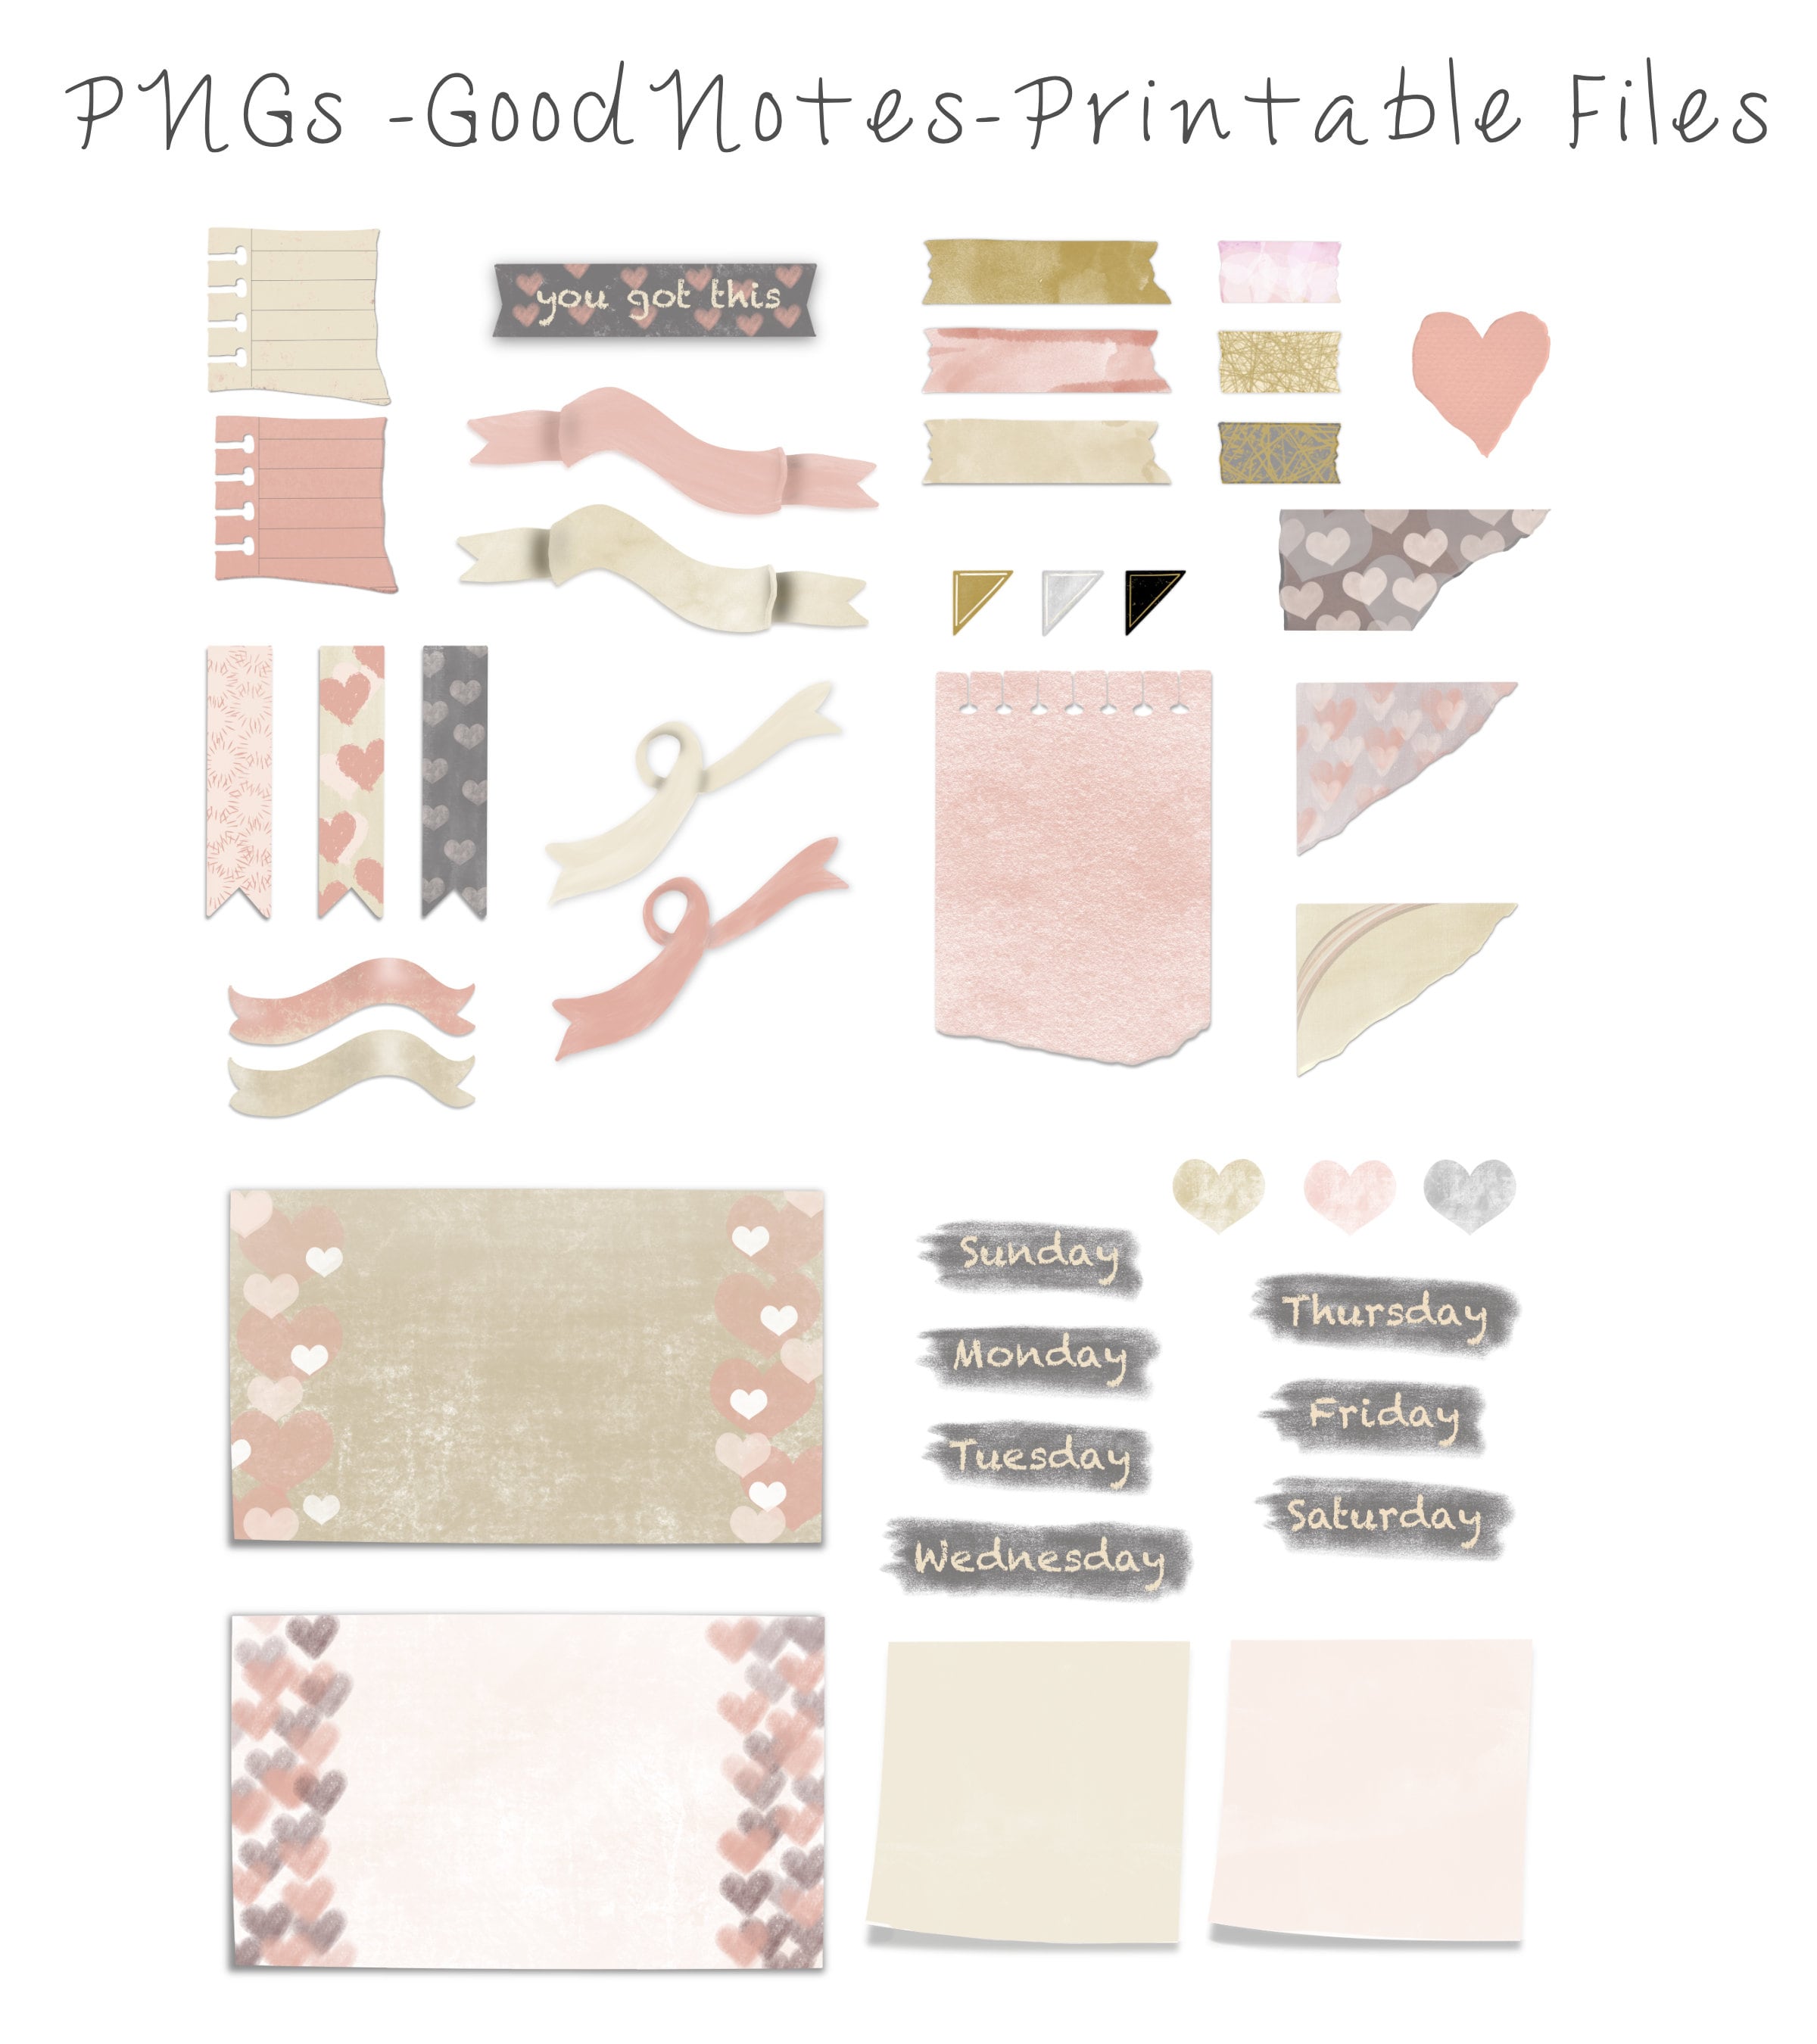 Rose Gold Washi Tape Digital Stickers Stickers for Goodnotes and Notability  Digital Washi Tape 18 PNG Files 